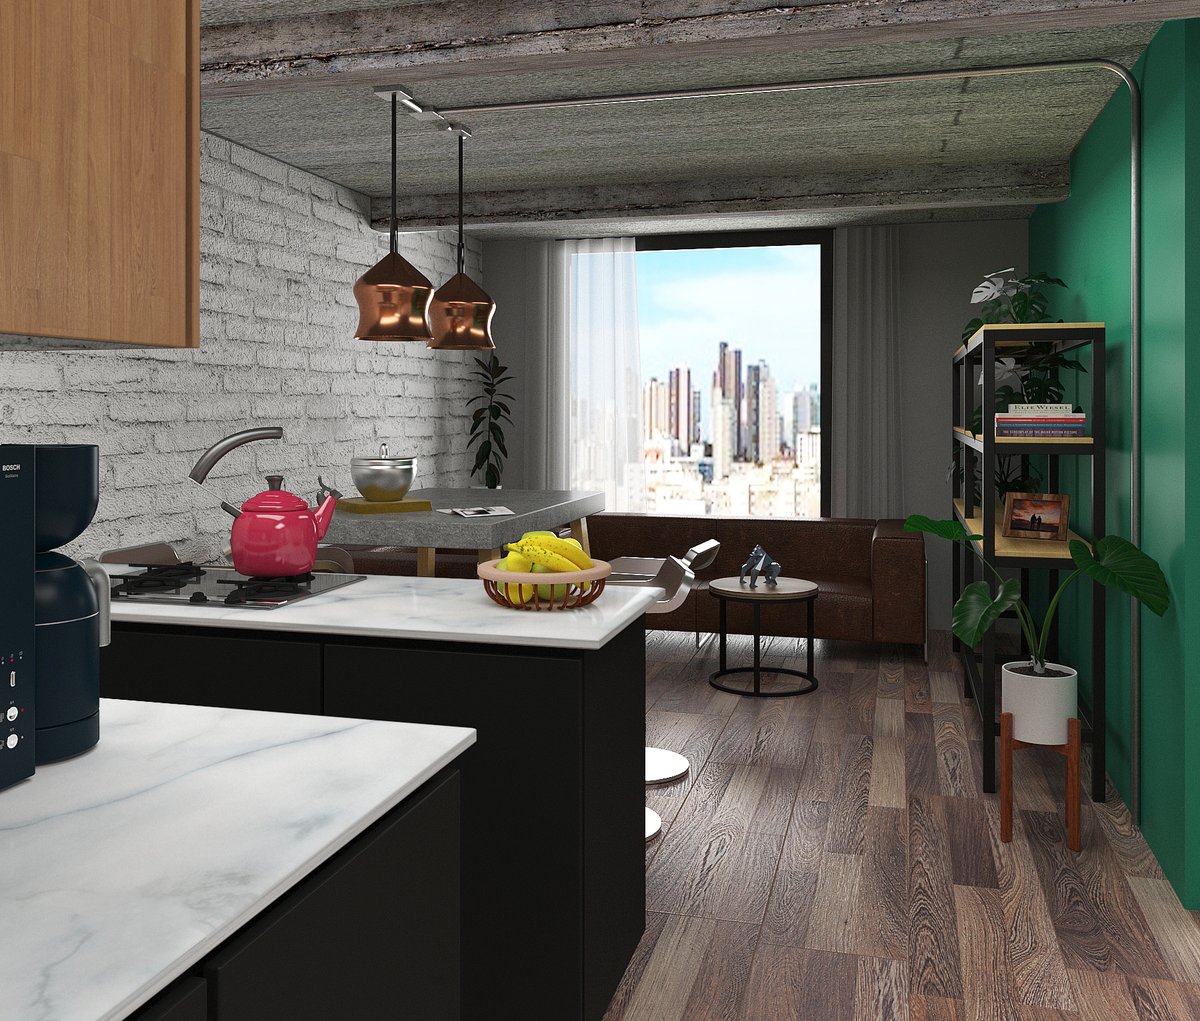 We are doing some renderings for the restoration for an apartment industrial chic

#rendering #interiordesign #industrial #industrialchic #apartment #homedecor #interiorismo #arquitectura #industrialchic